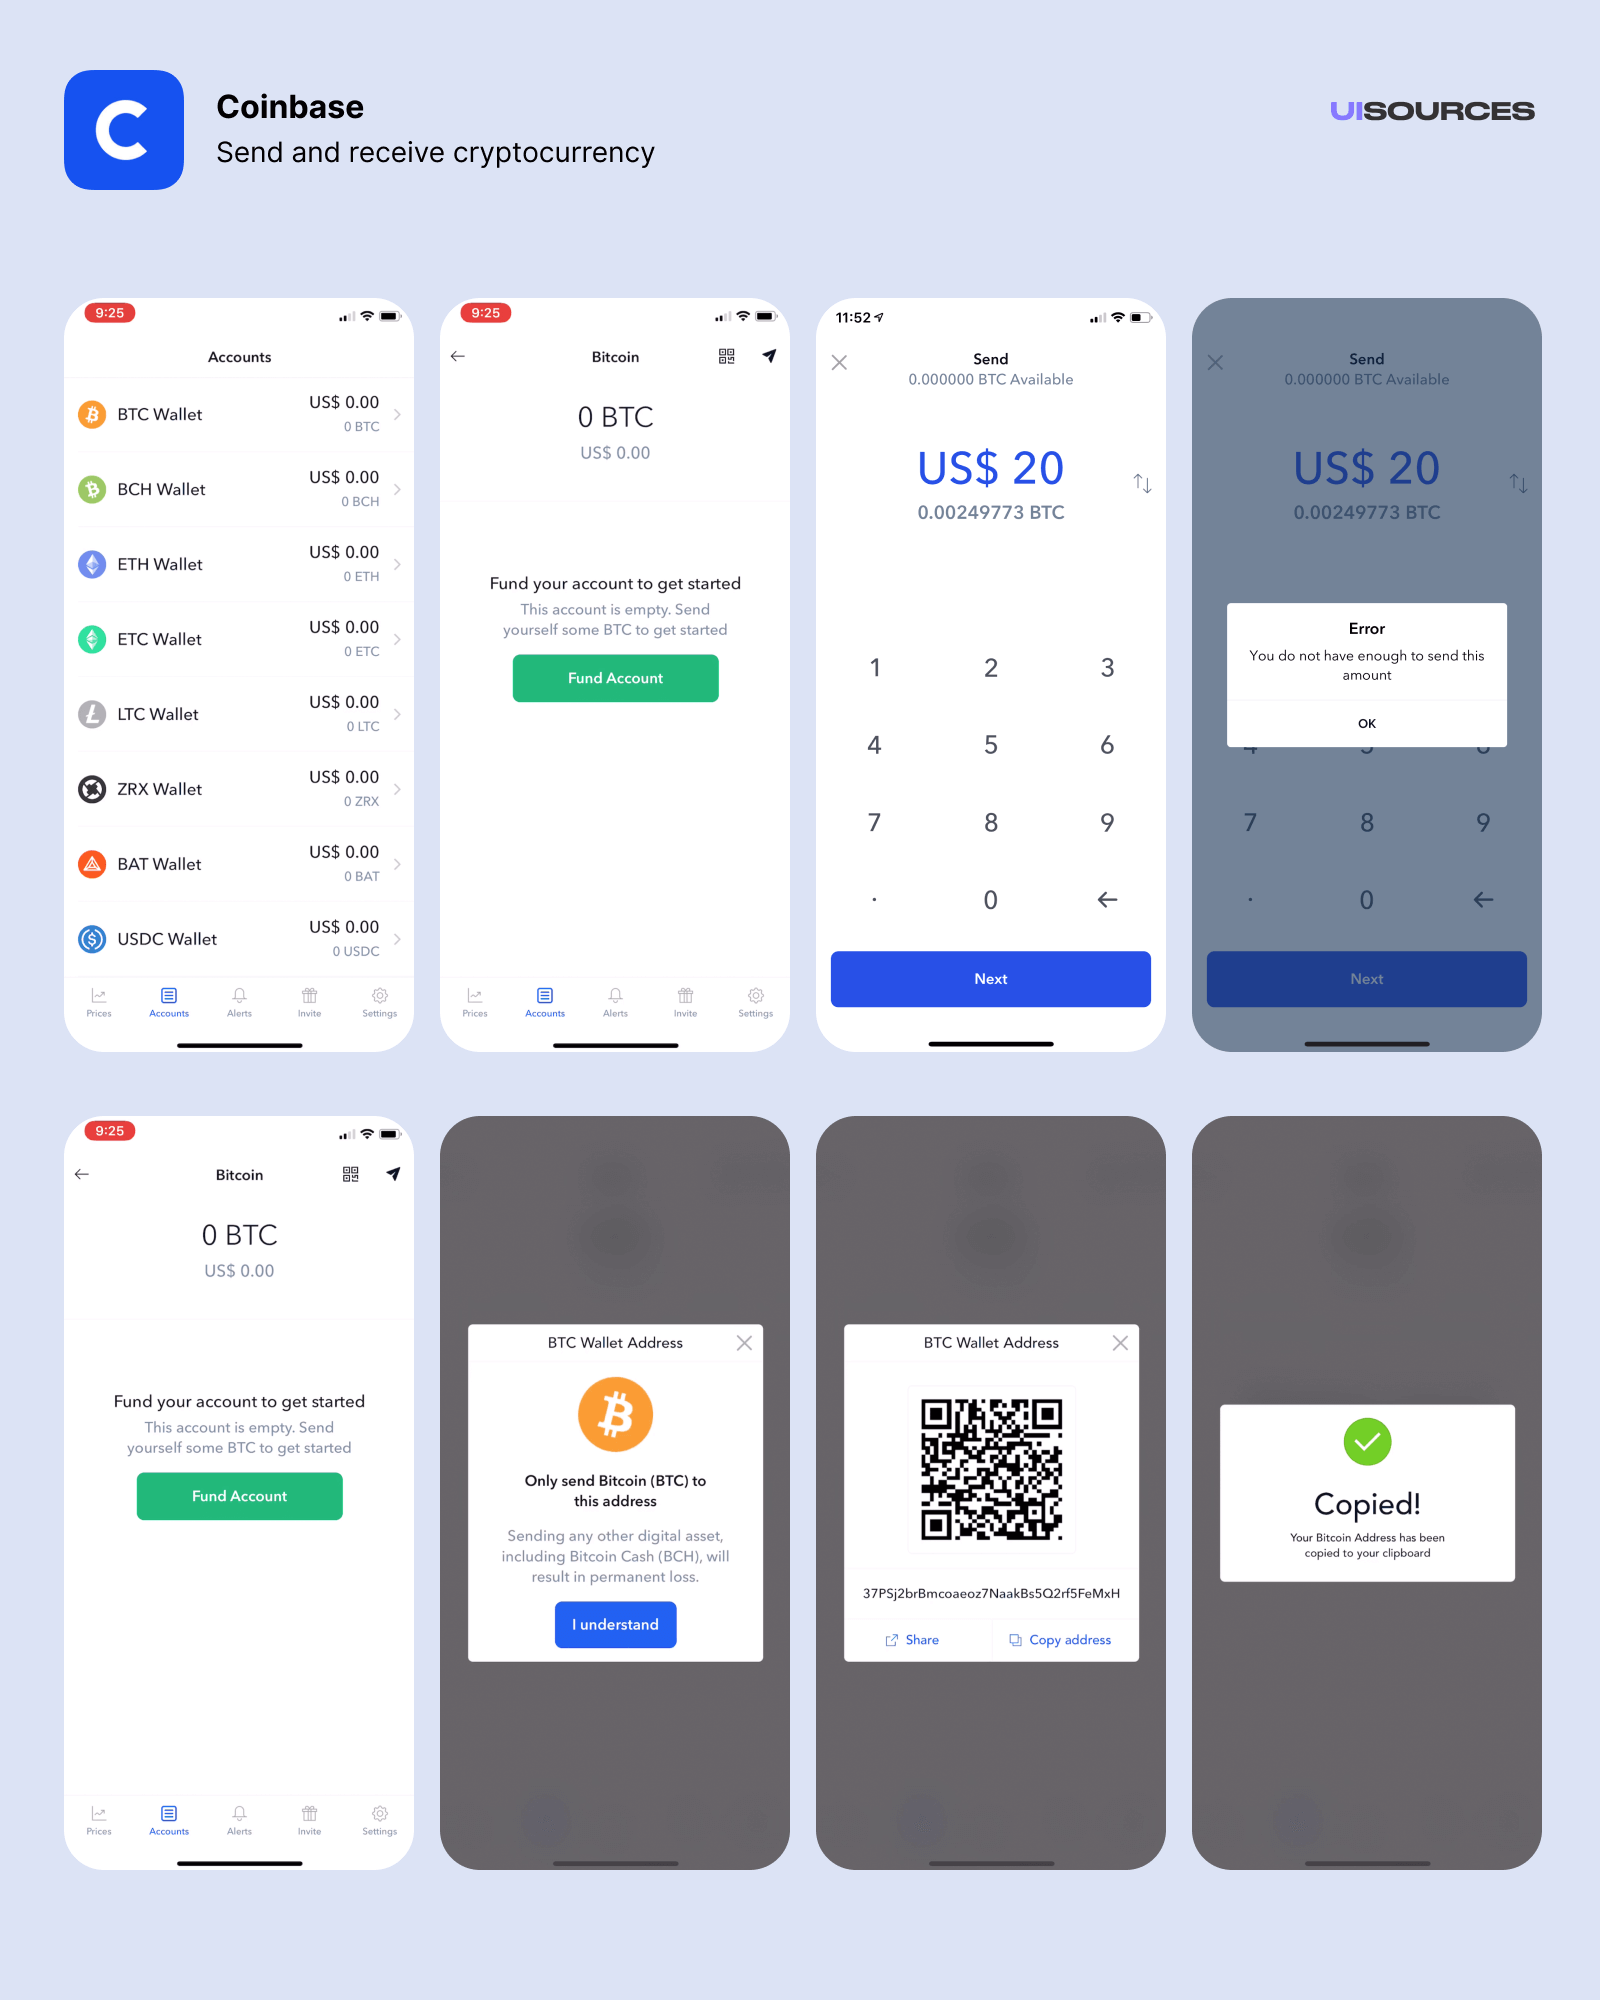 Send and receive cryptocurrency